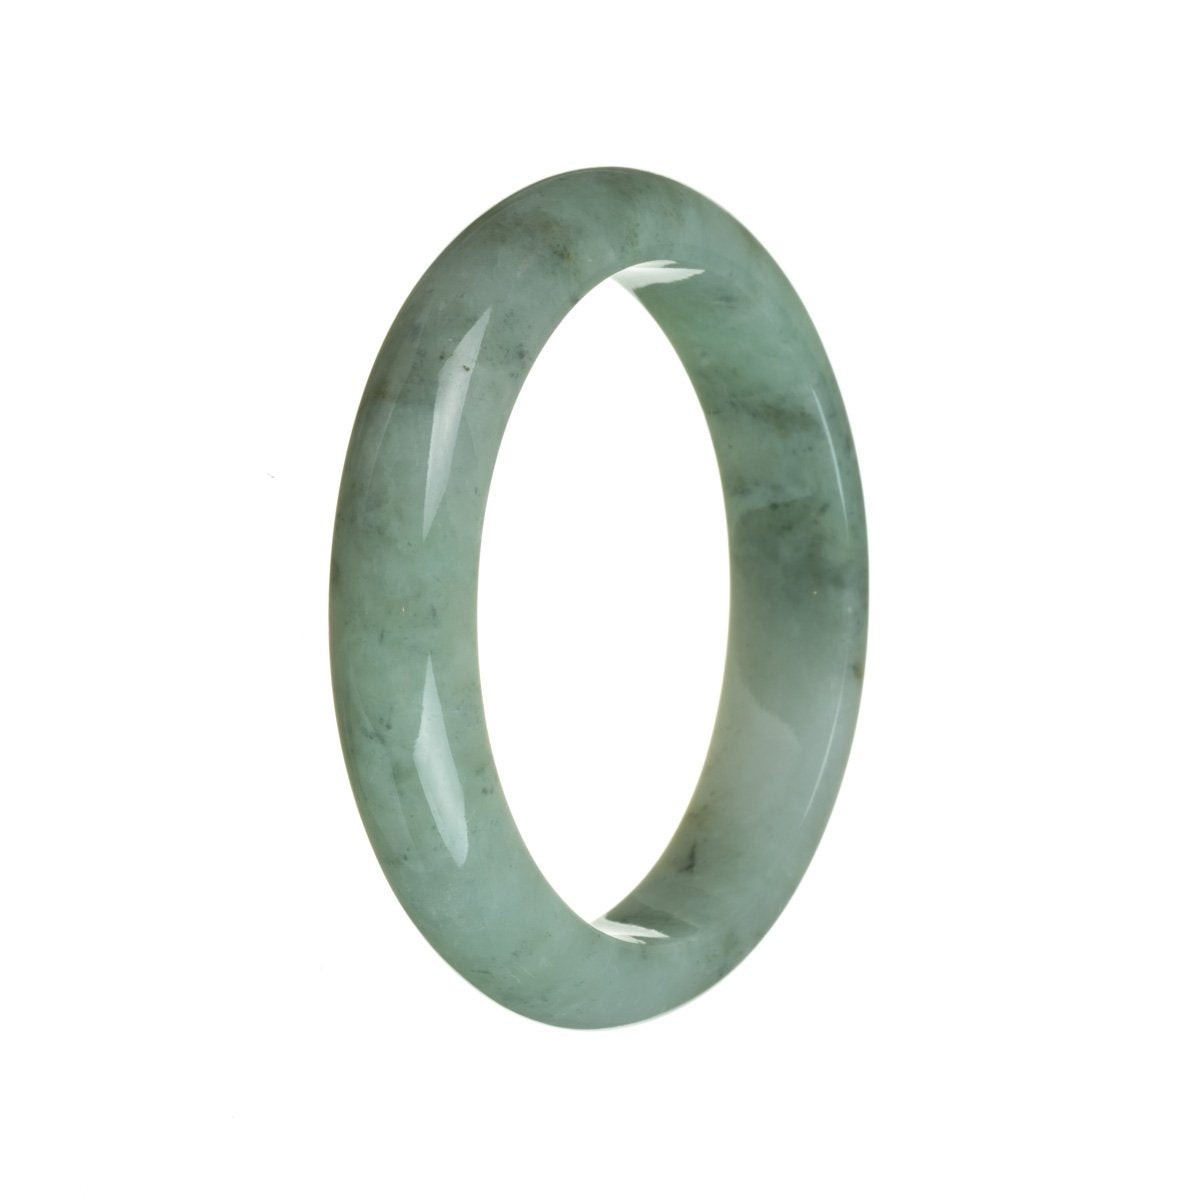 A beautiful green jade bangle with a traditional design and a semi-round shape, measuring 60mm in diameter. Perfect for adding a touch of elegance to any outfit.